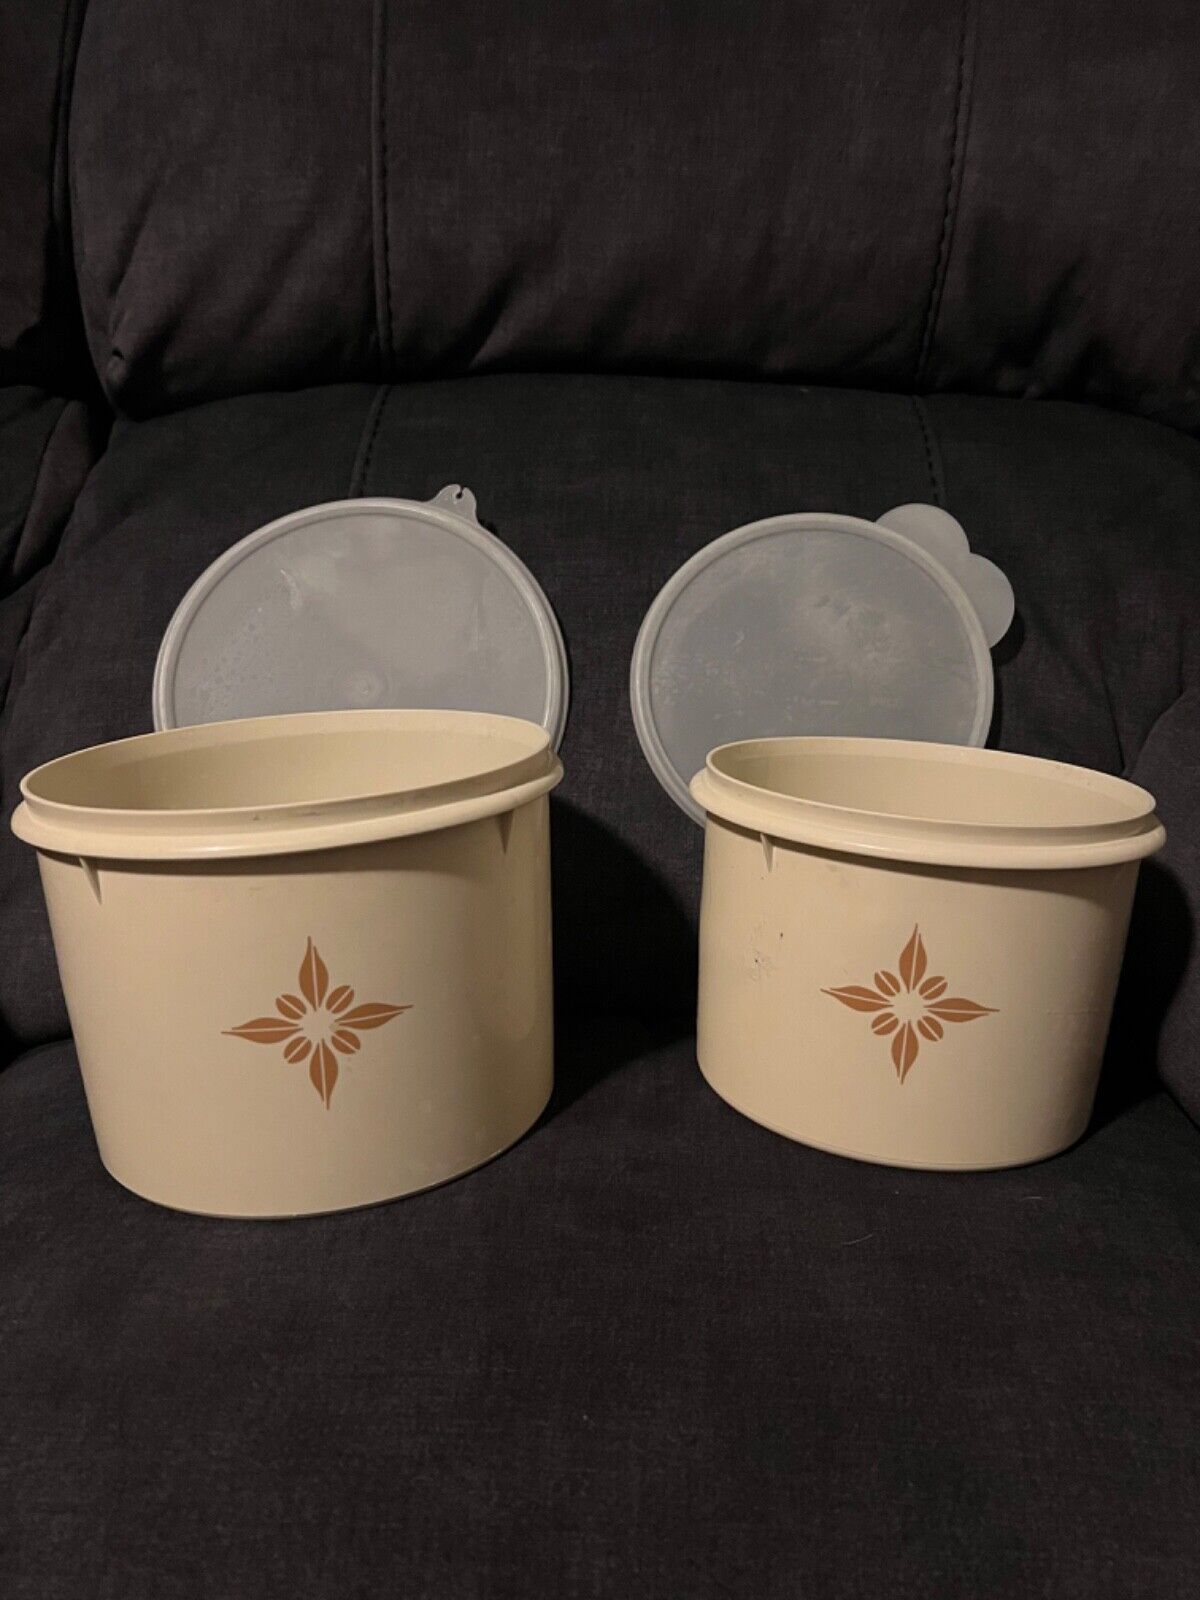 Vintage 1970s Tupperware 2 Nesting Containers Canisters Set With Lids